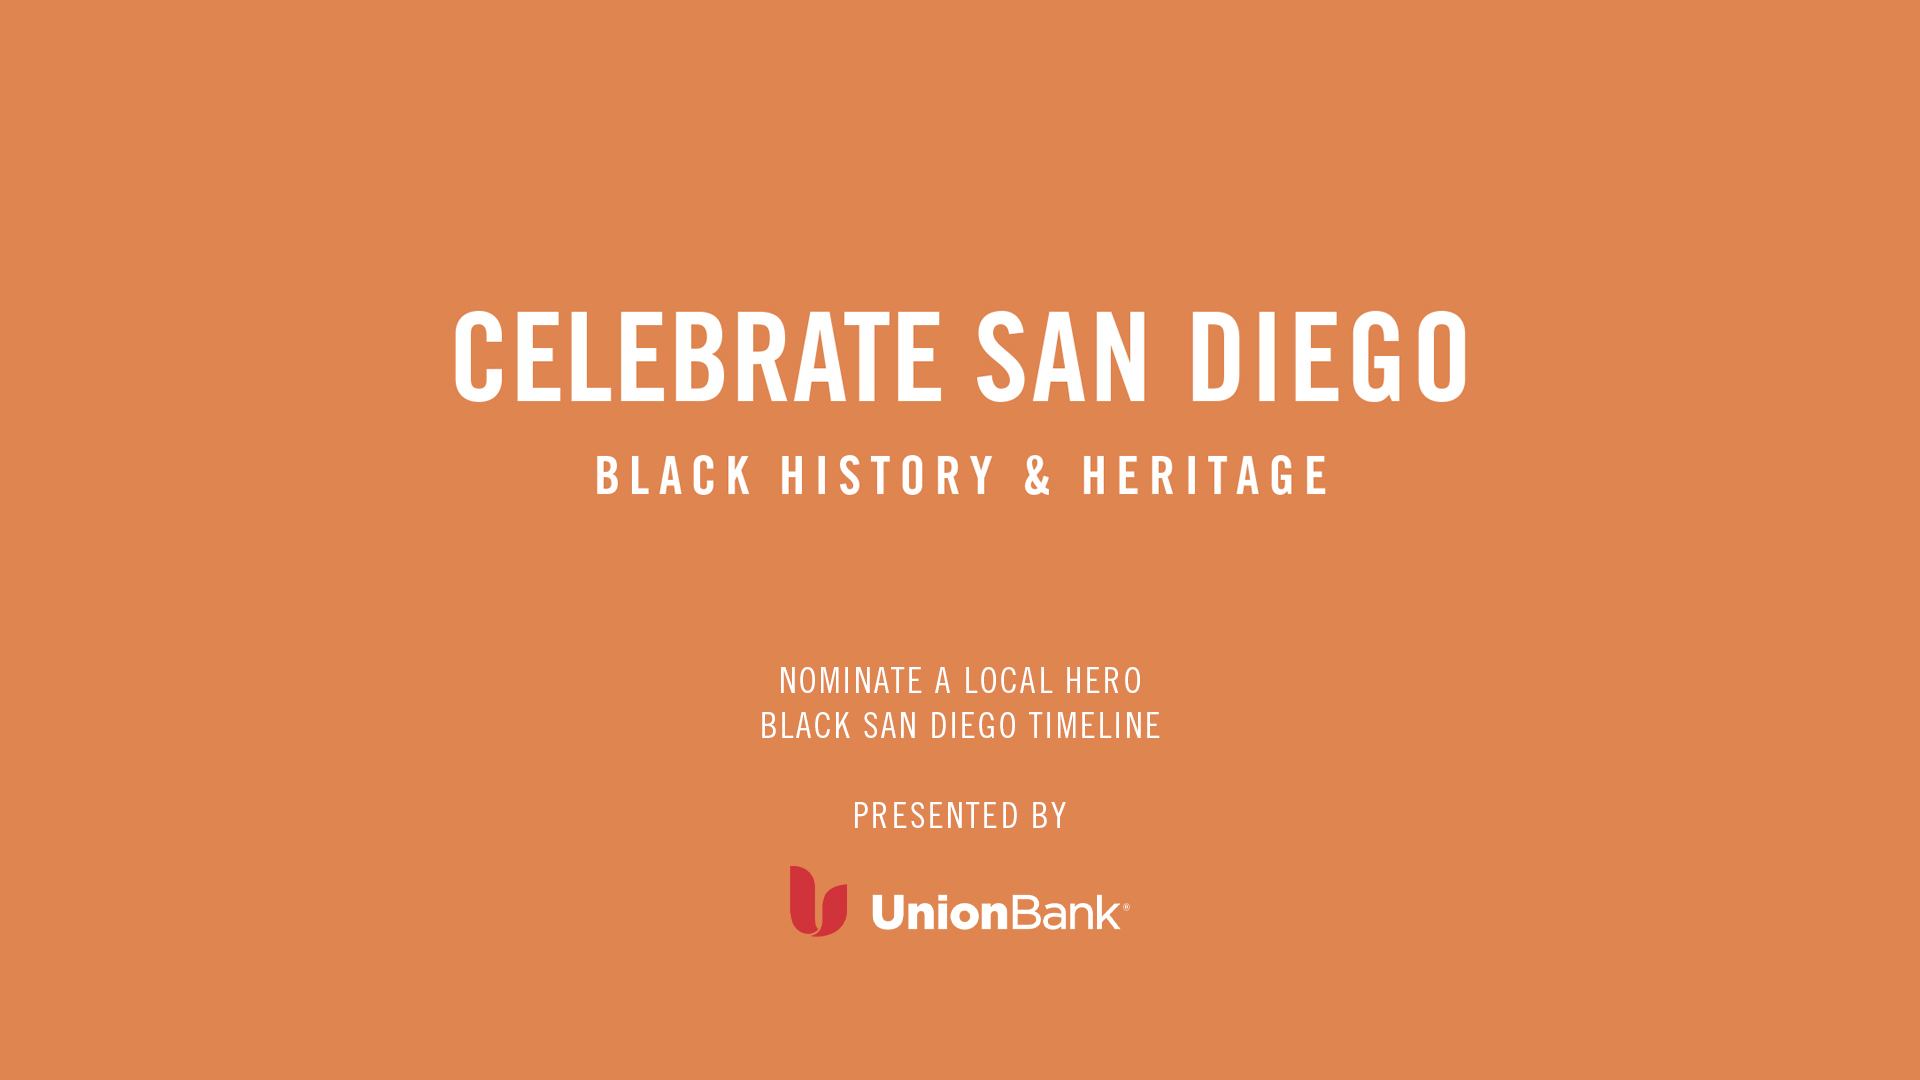 Here are some of the Black History Month events in San Antonio for